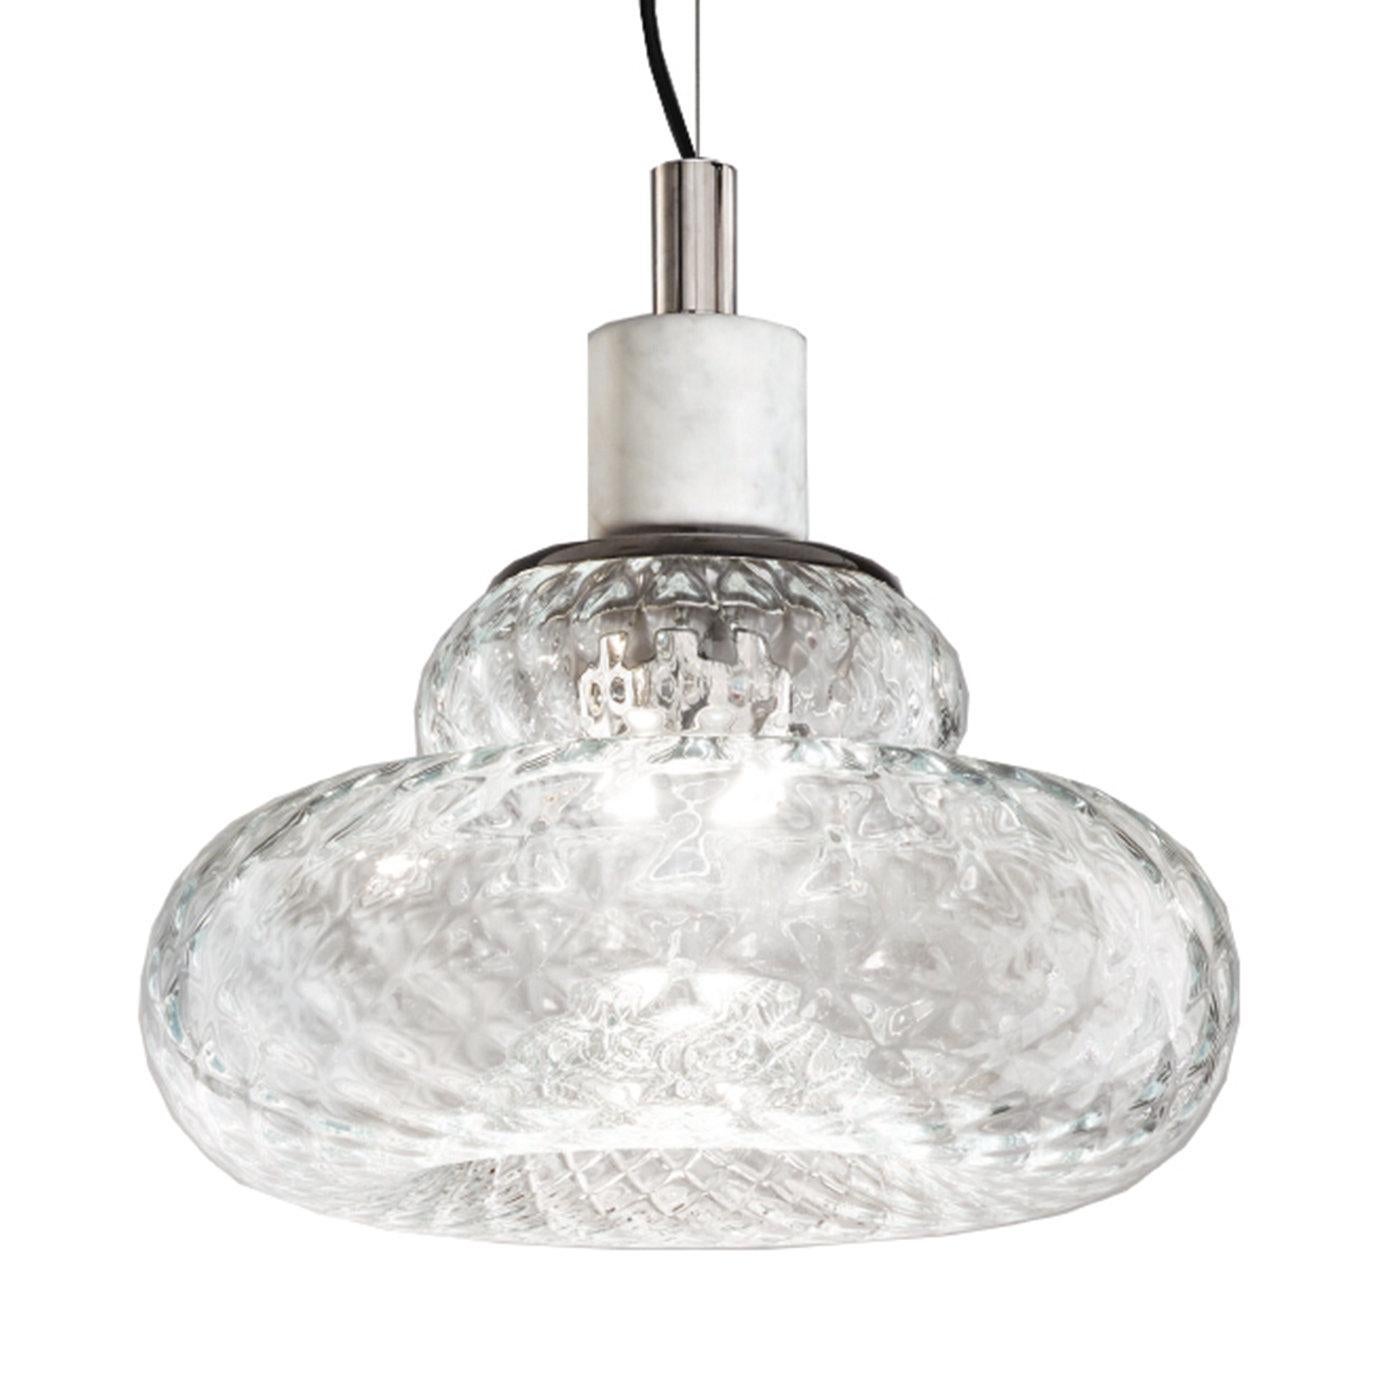 The pureness of Carrara marble and crystal Murano glass merge in this stunning pendant lamp whose shade celebrates the fluidity of convex and concave lines. The glass diffuser's design is embellished with the 